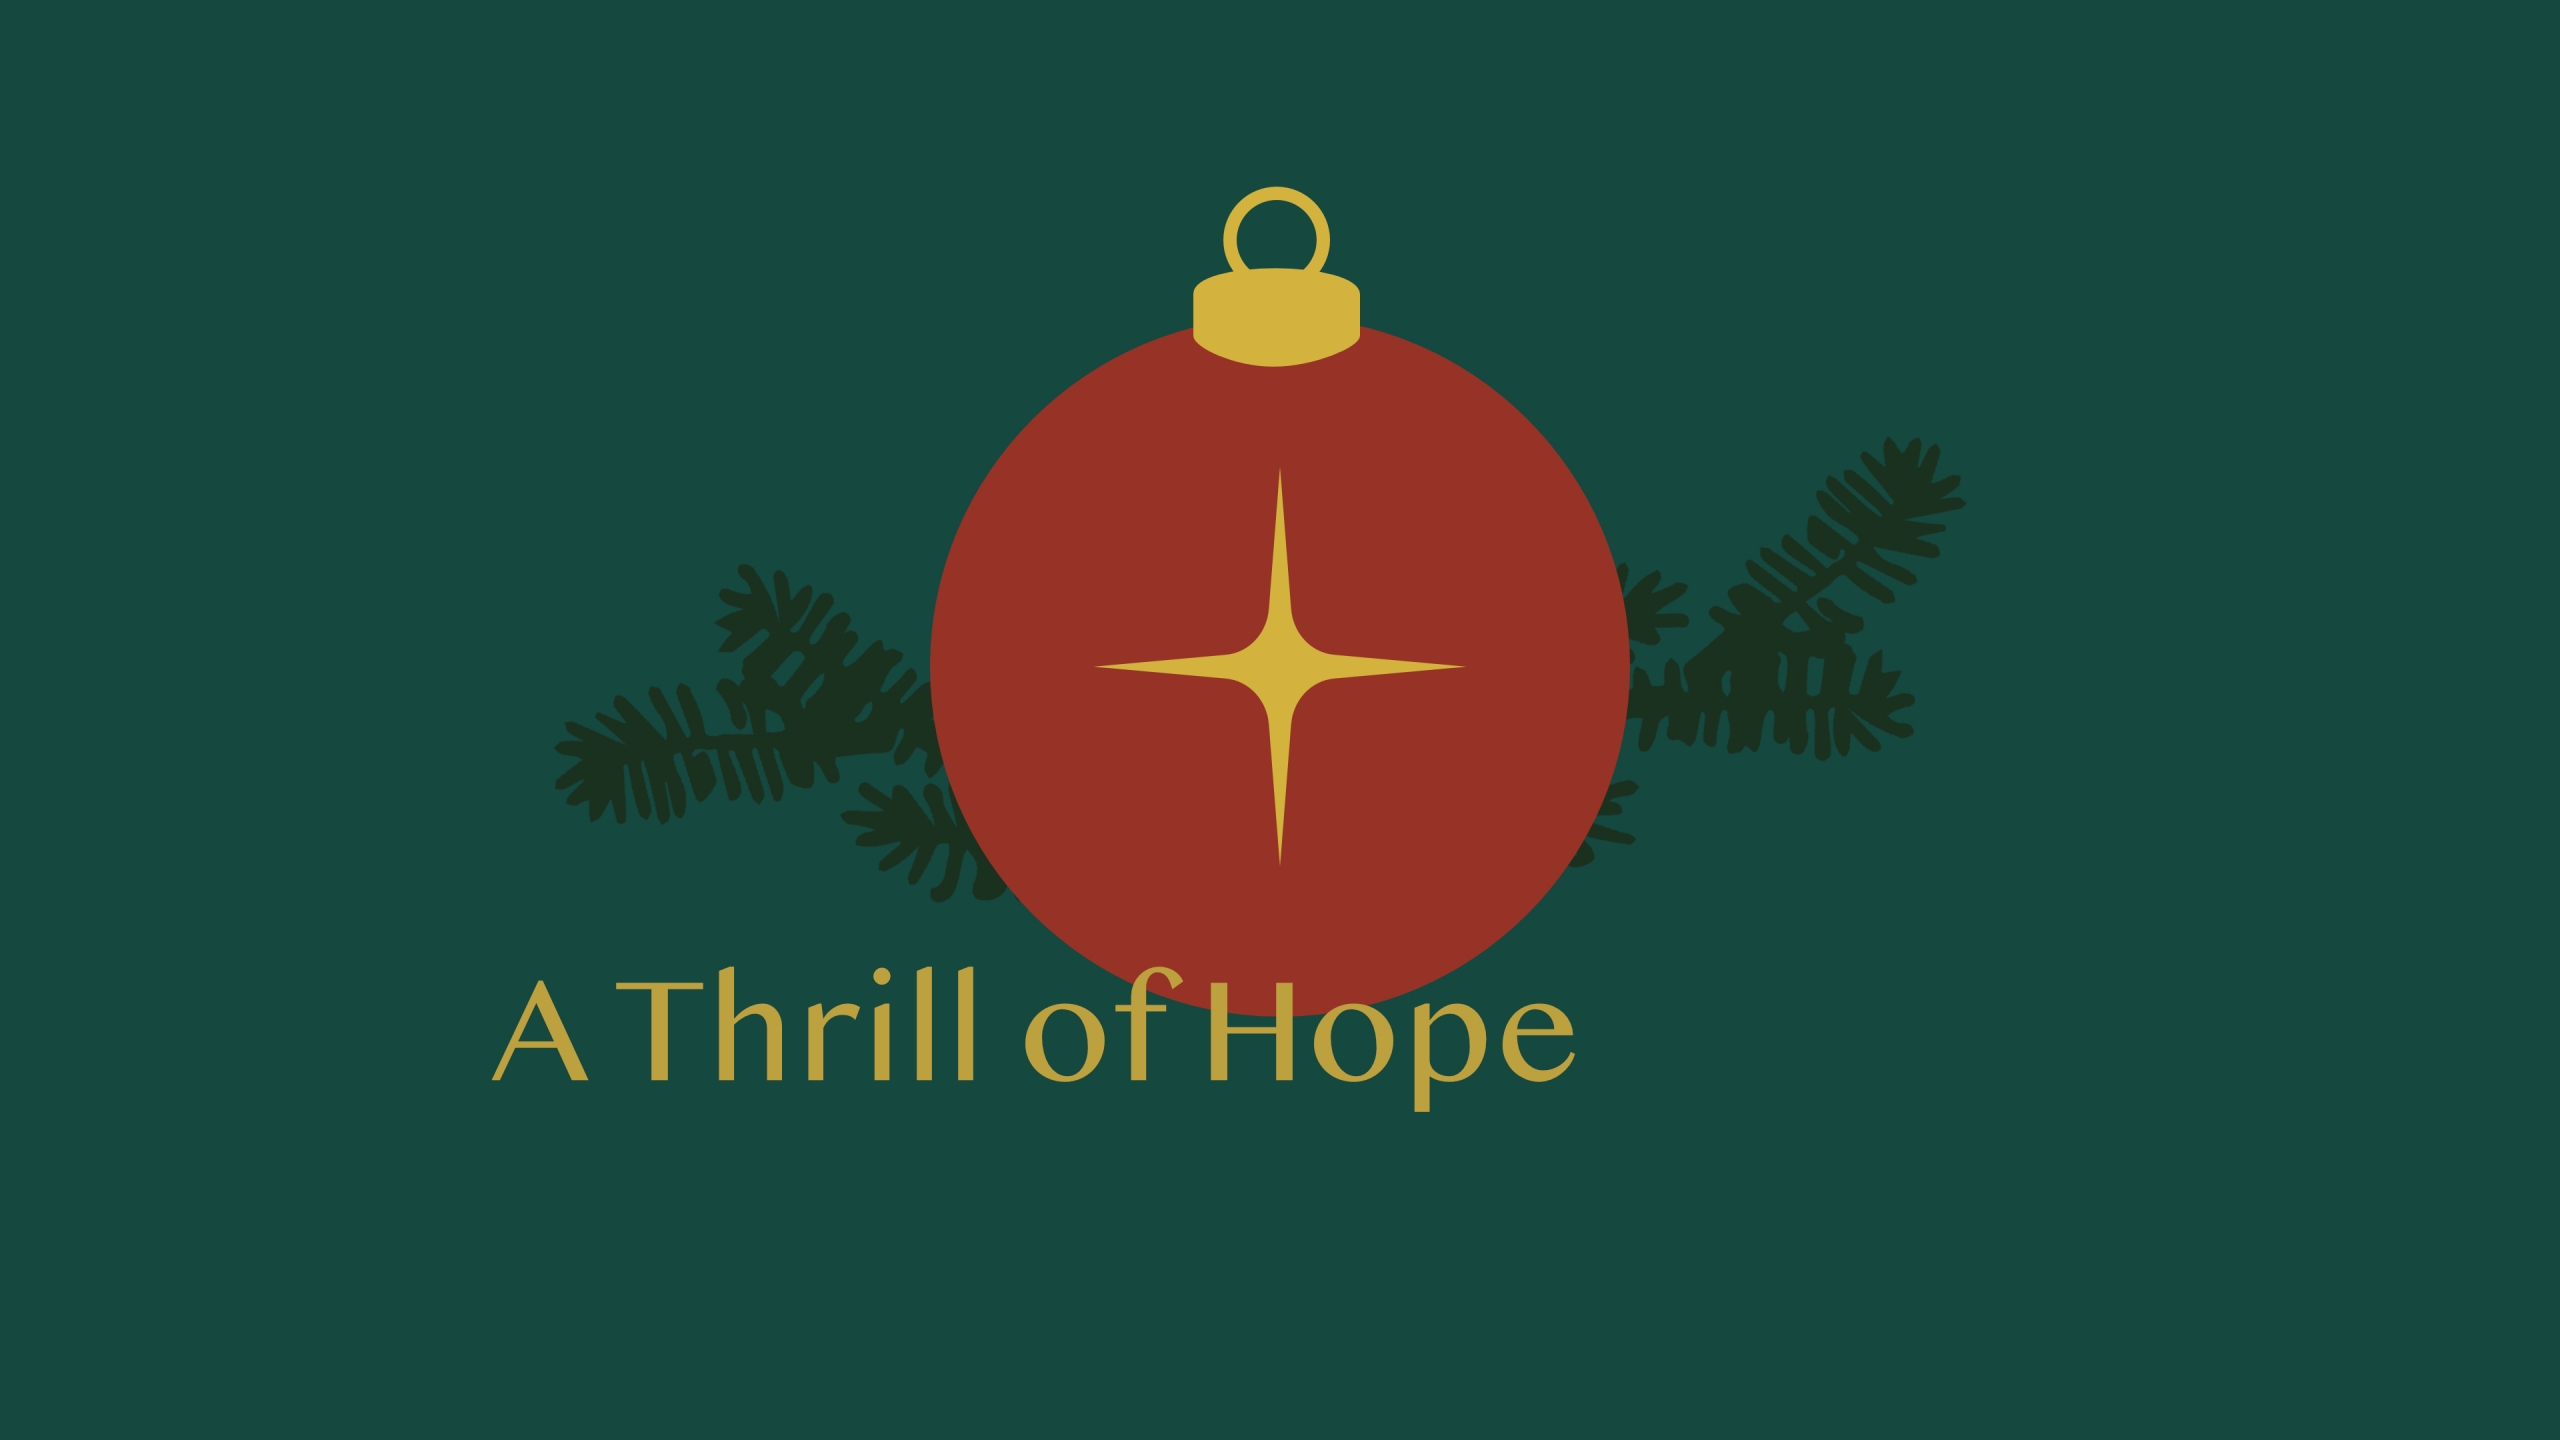 Advent: A Thrill of Hope